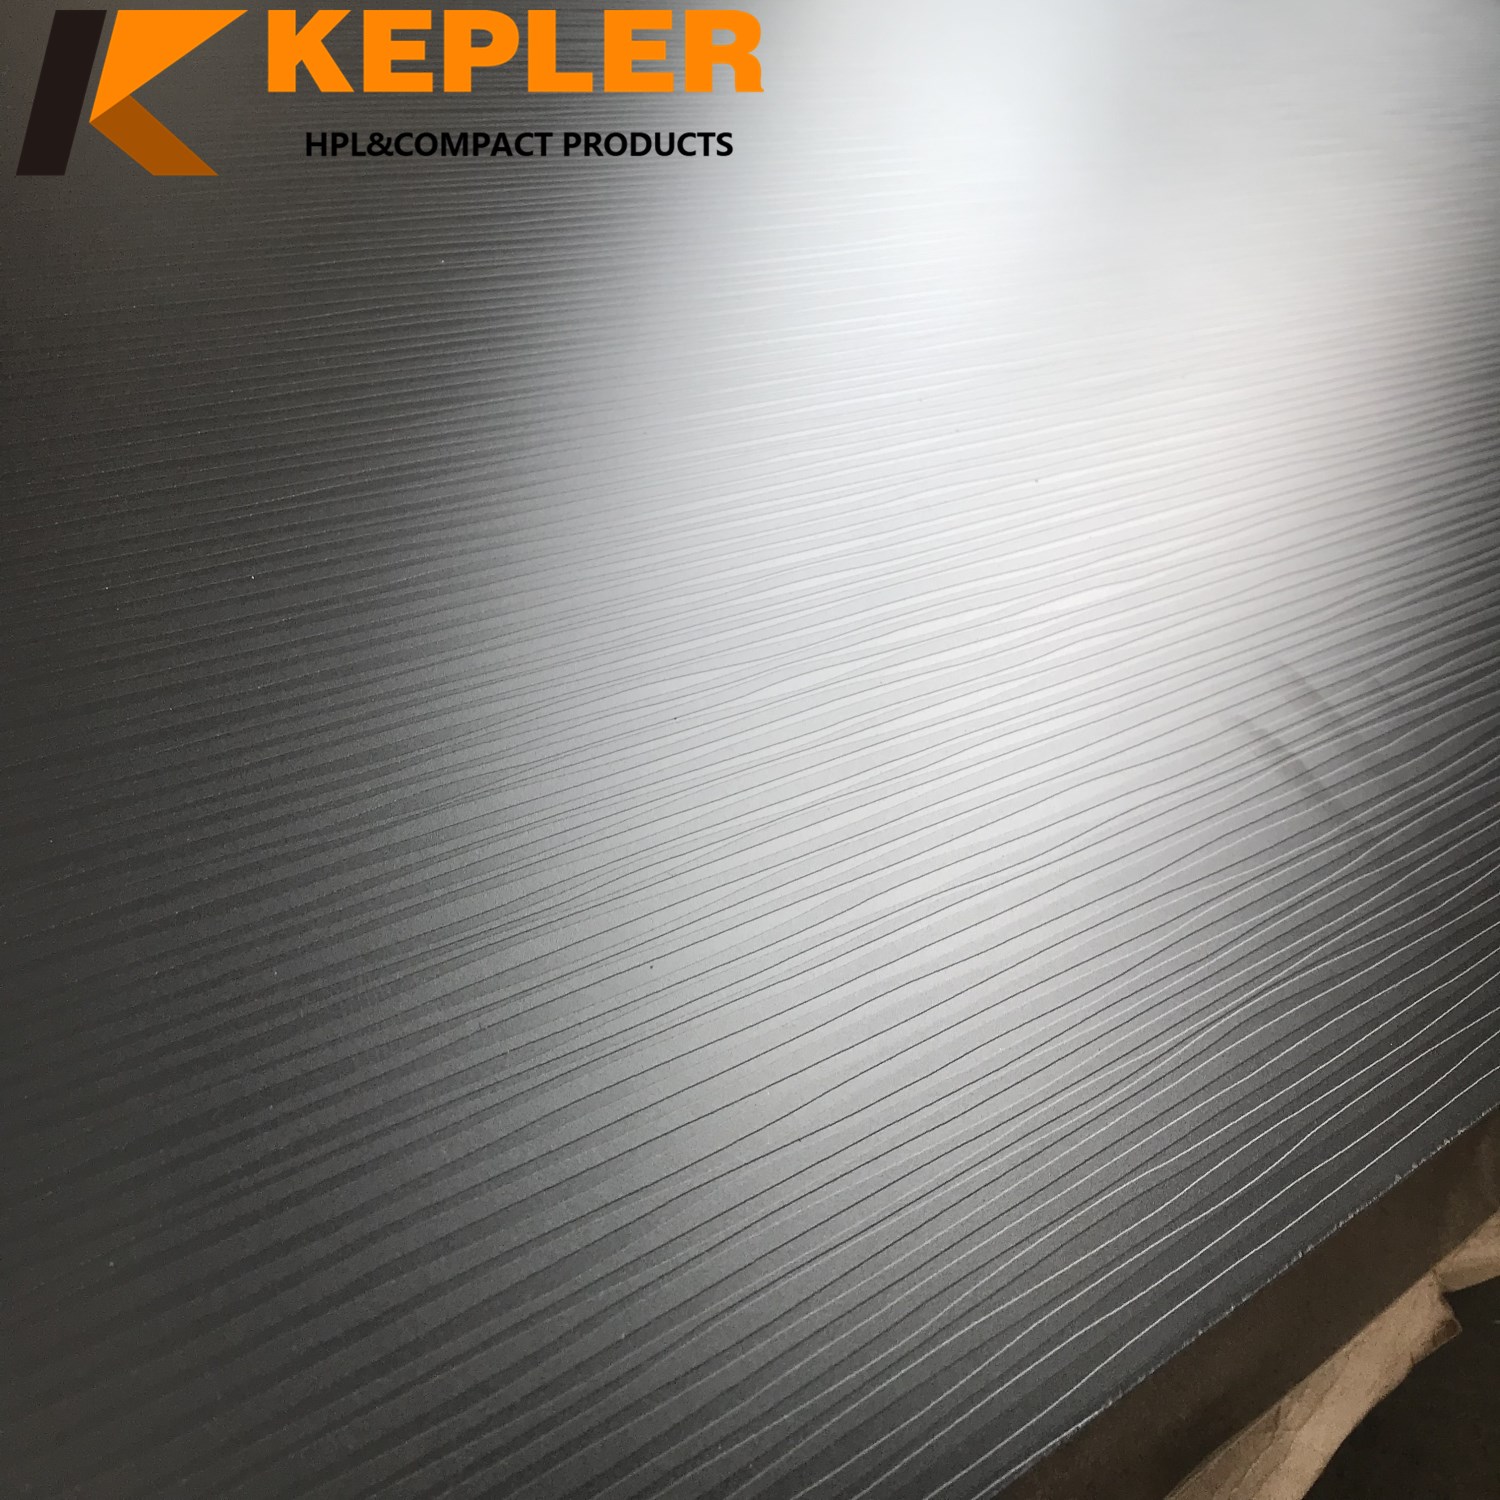 Kepler special surface compact laminate board